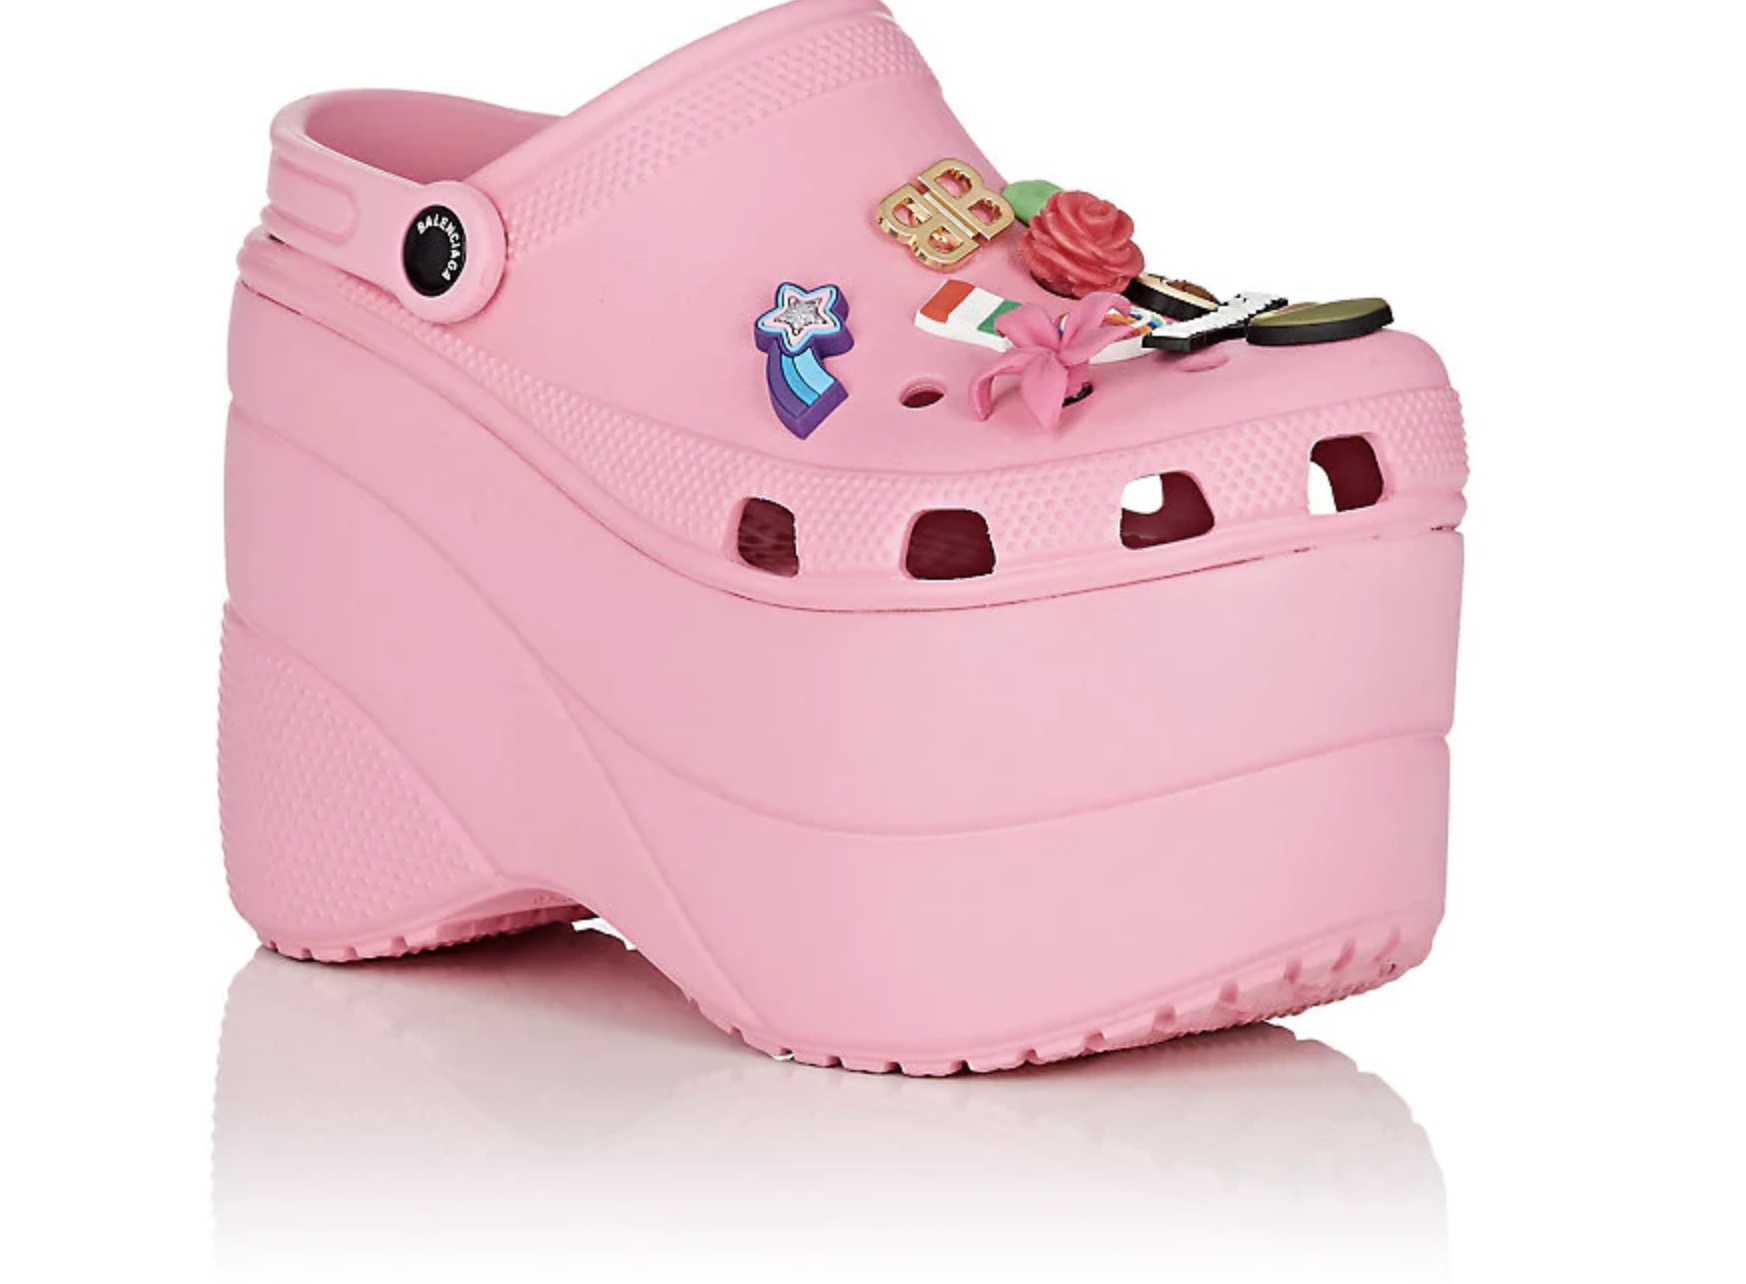 High-Heel Crocs Are The Latest Crocs You Should Never EVER Wear